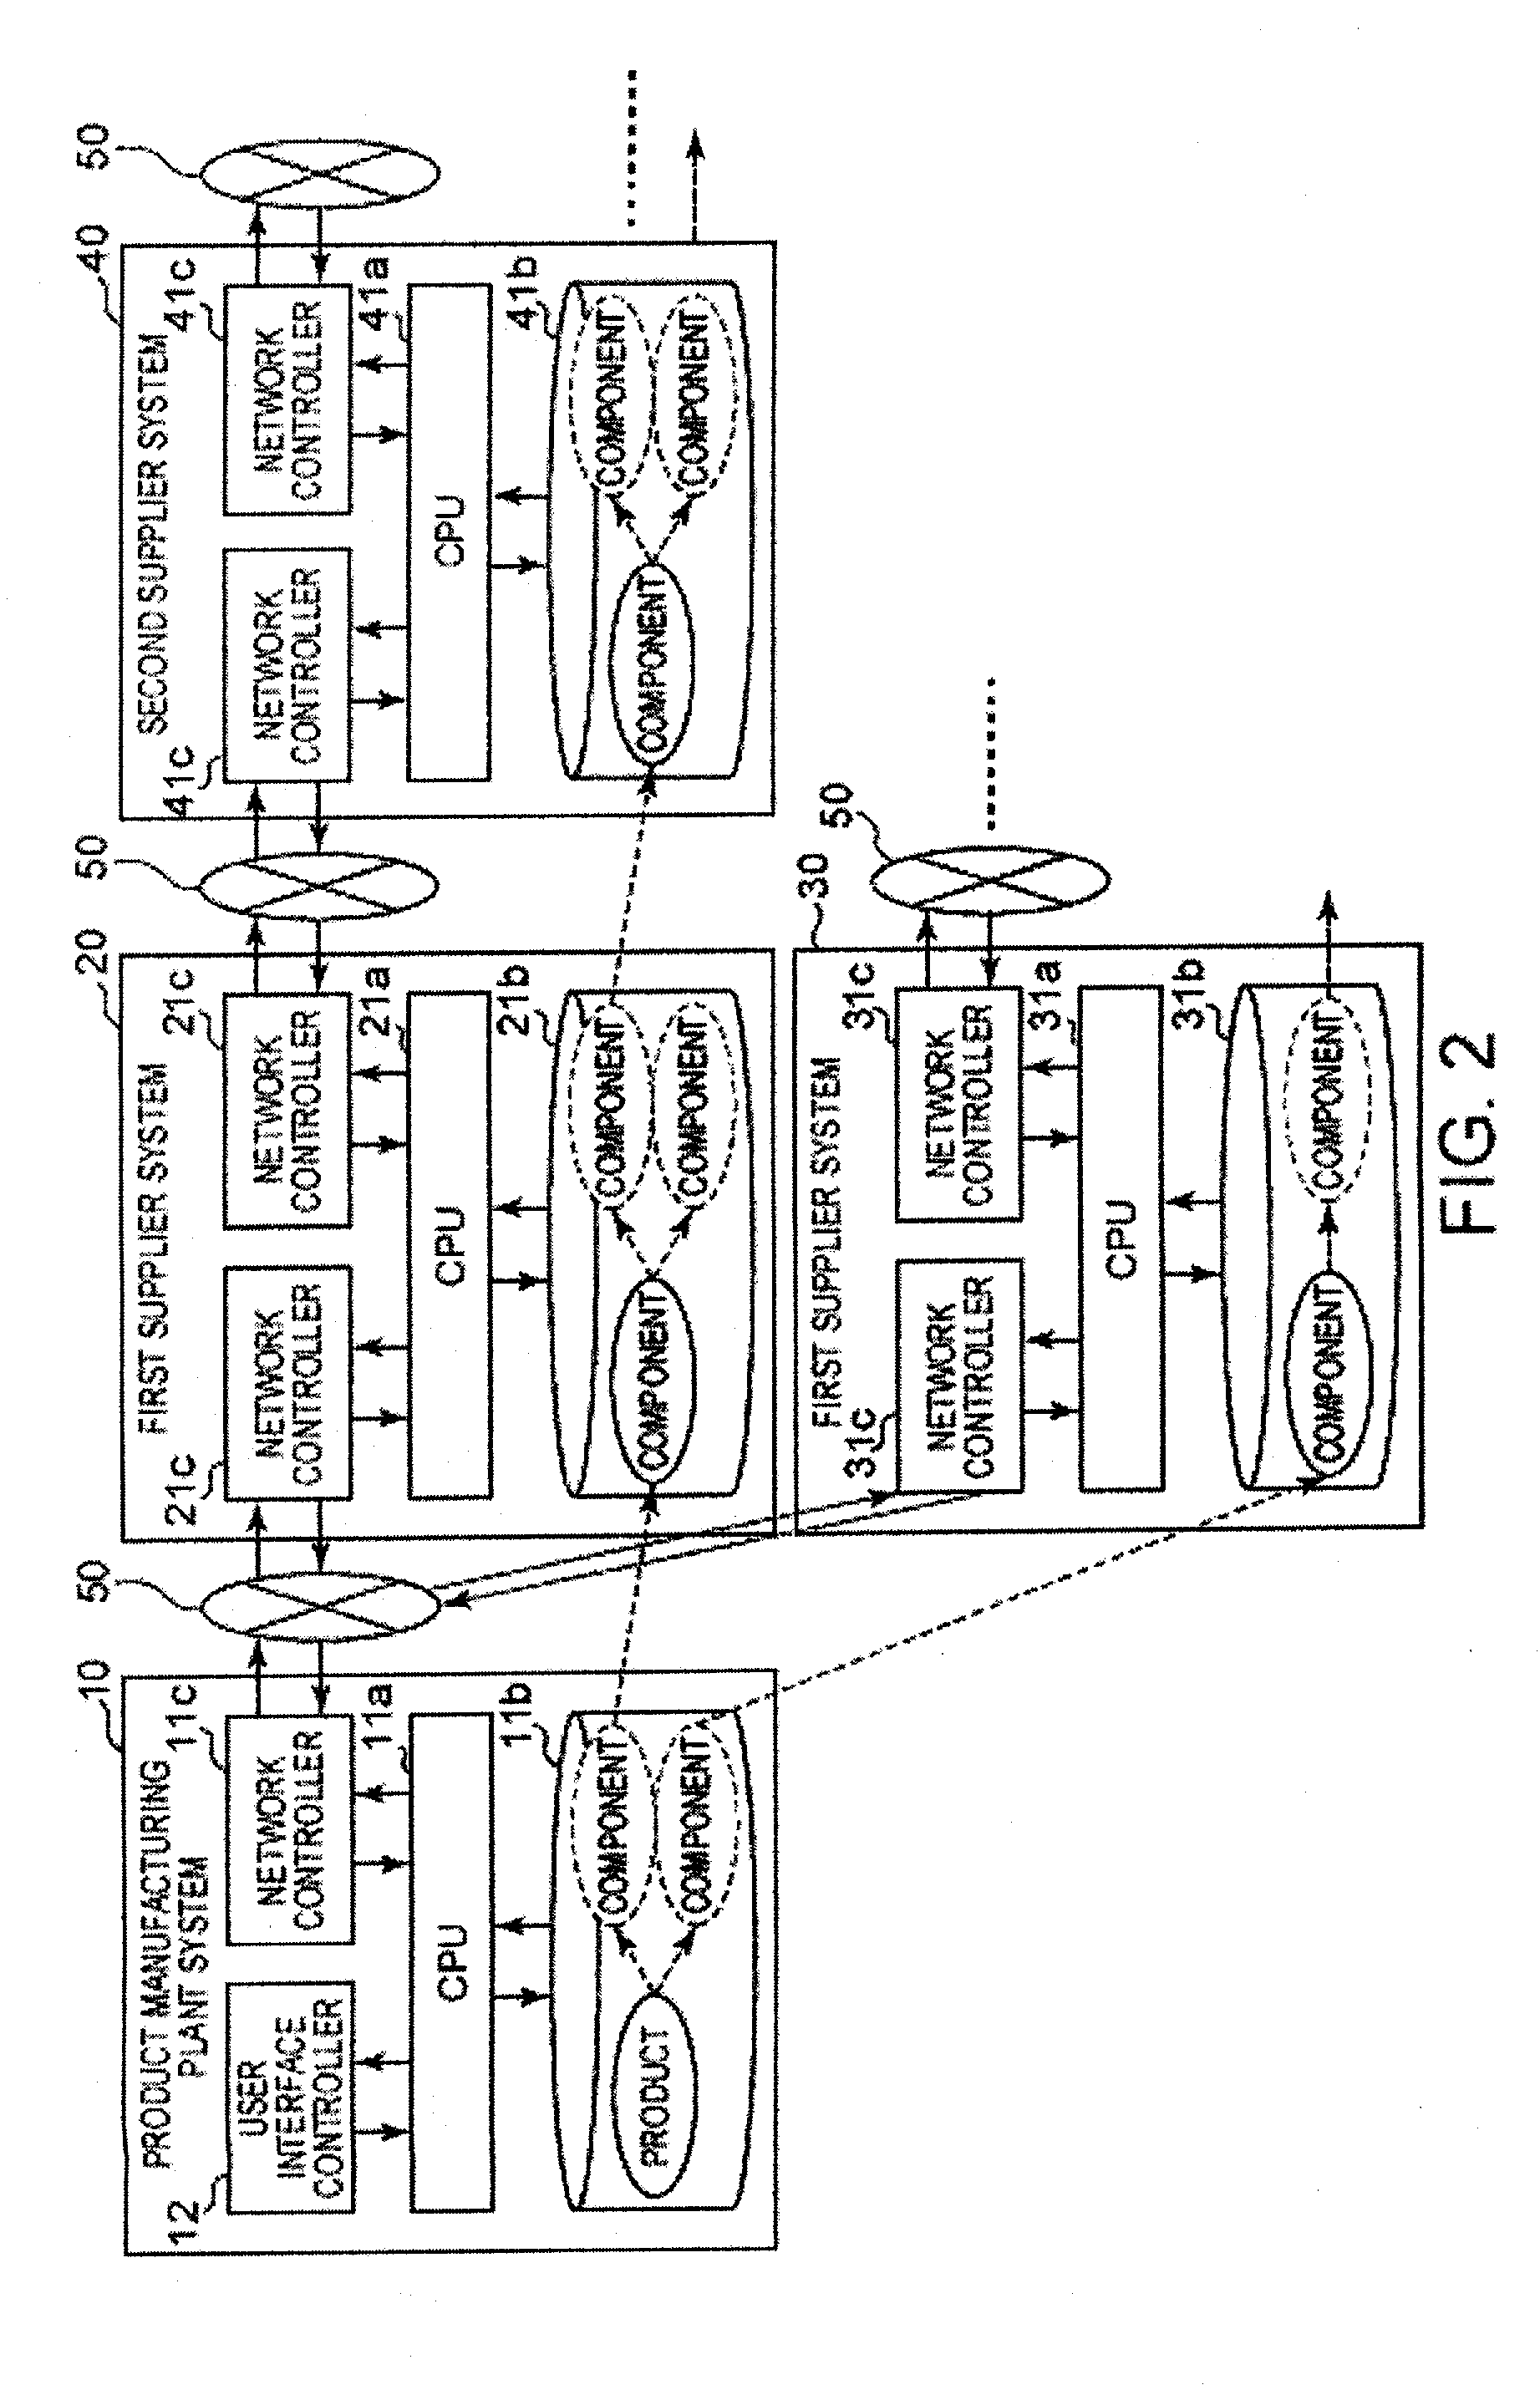 Method and system for obtaining a combination of faulty parts from a dispersed parts tree